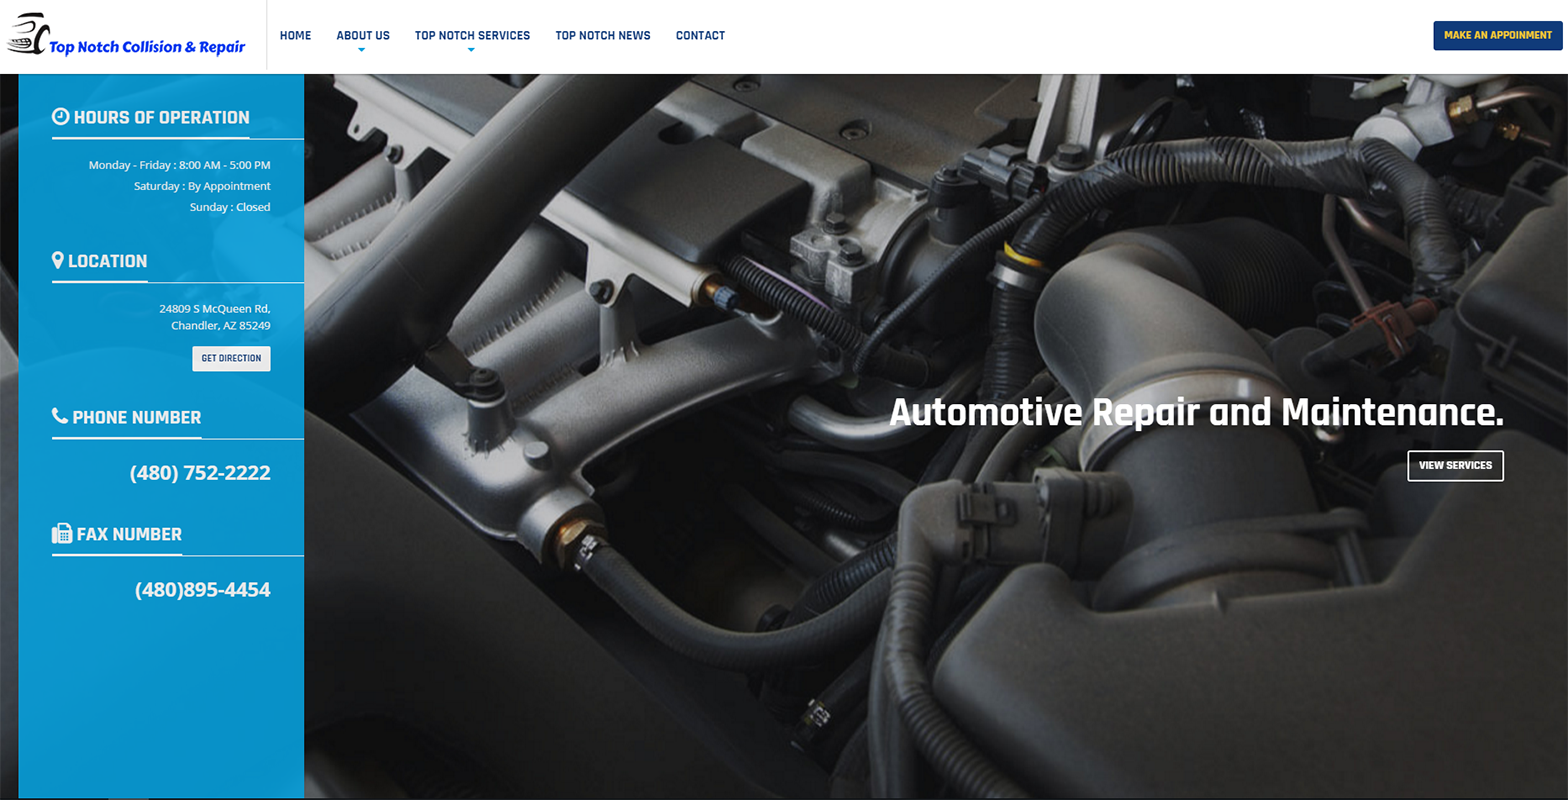 Top Notch Collision & REpair Home Page